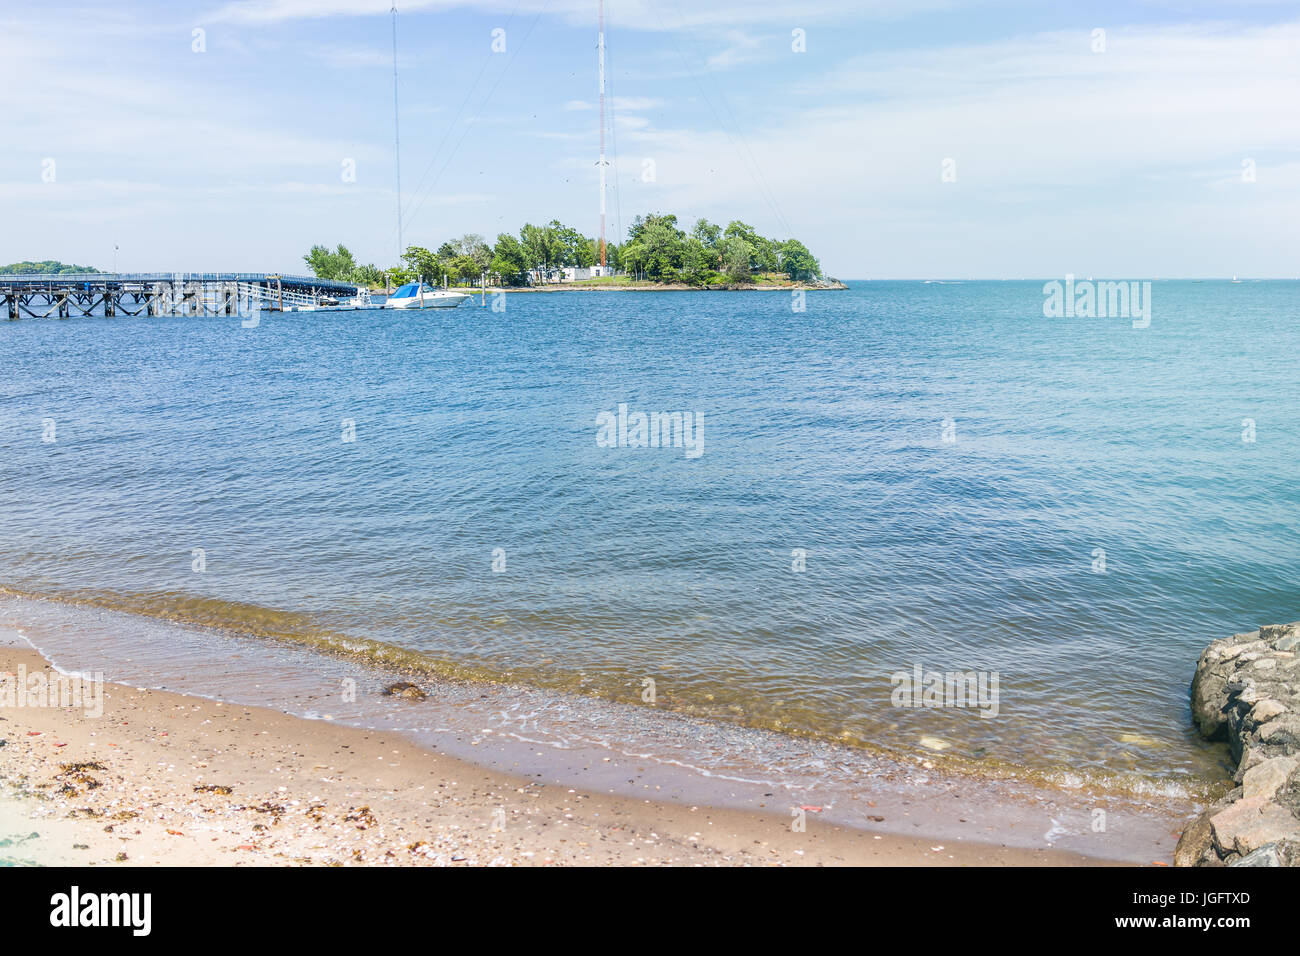 Bronx, USA - June 11, 2017: City Island harbor with boat on pier and sandy beach with ocean Stock Photo